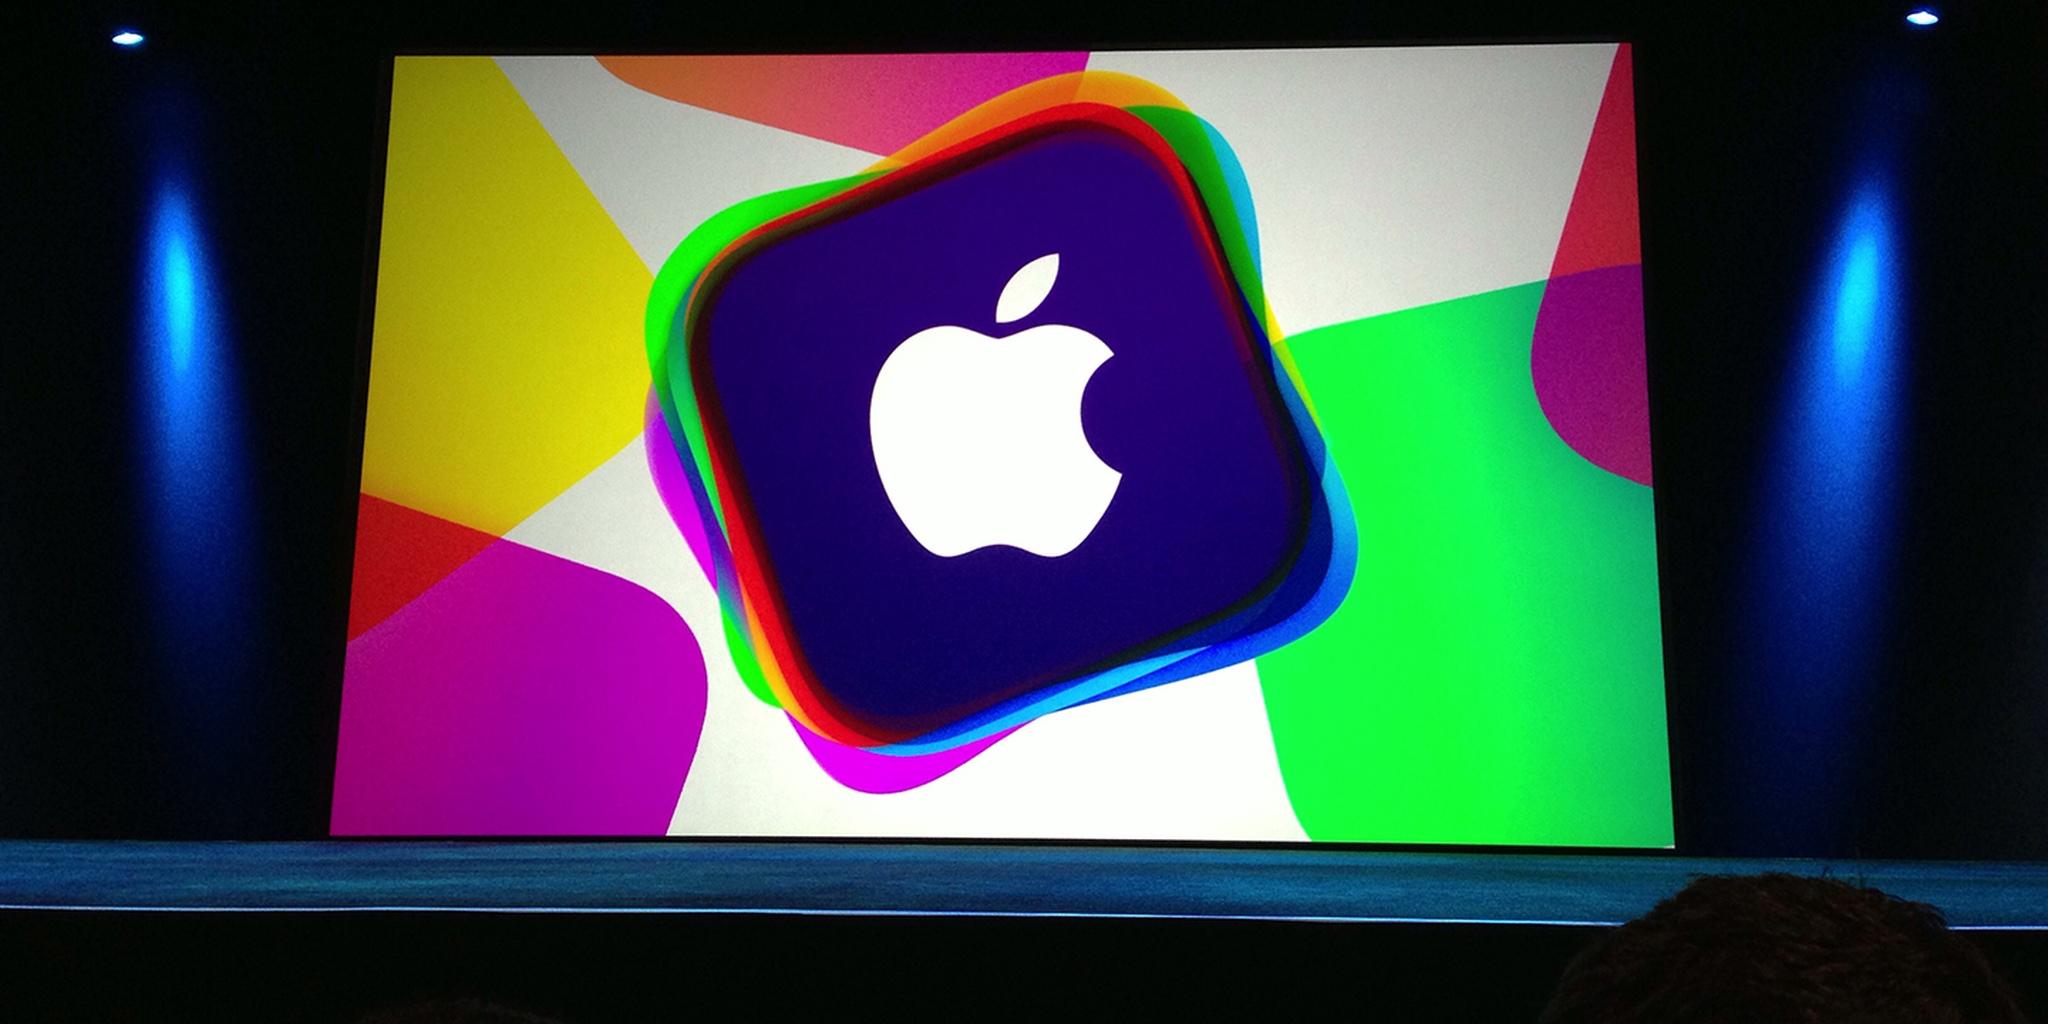 Future Apple Logo - Tim Cook on Apple TV: 'The future of television is apps'. The Daily Dot